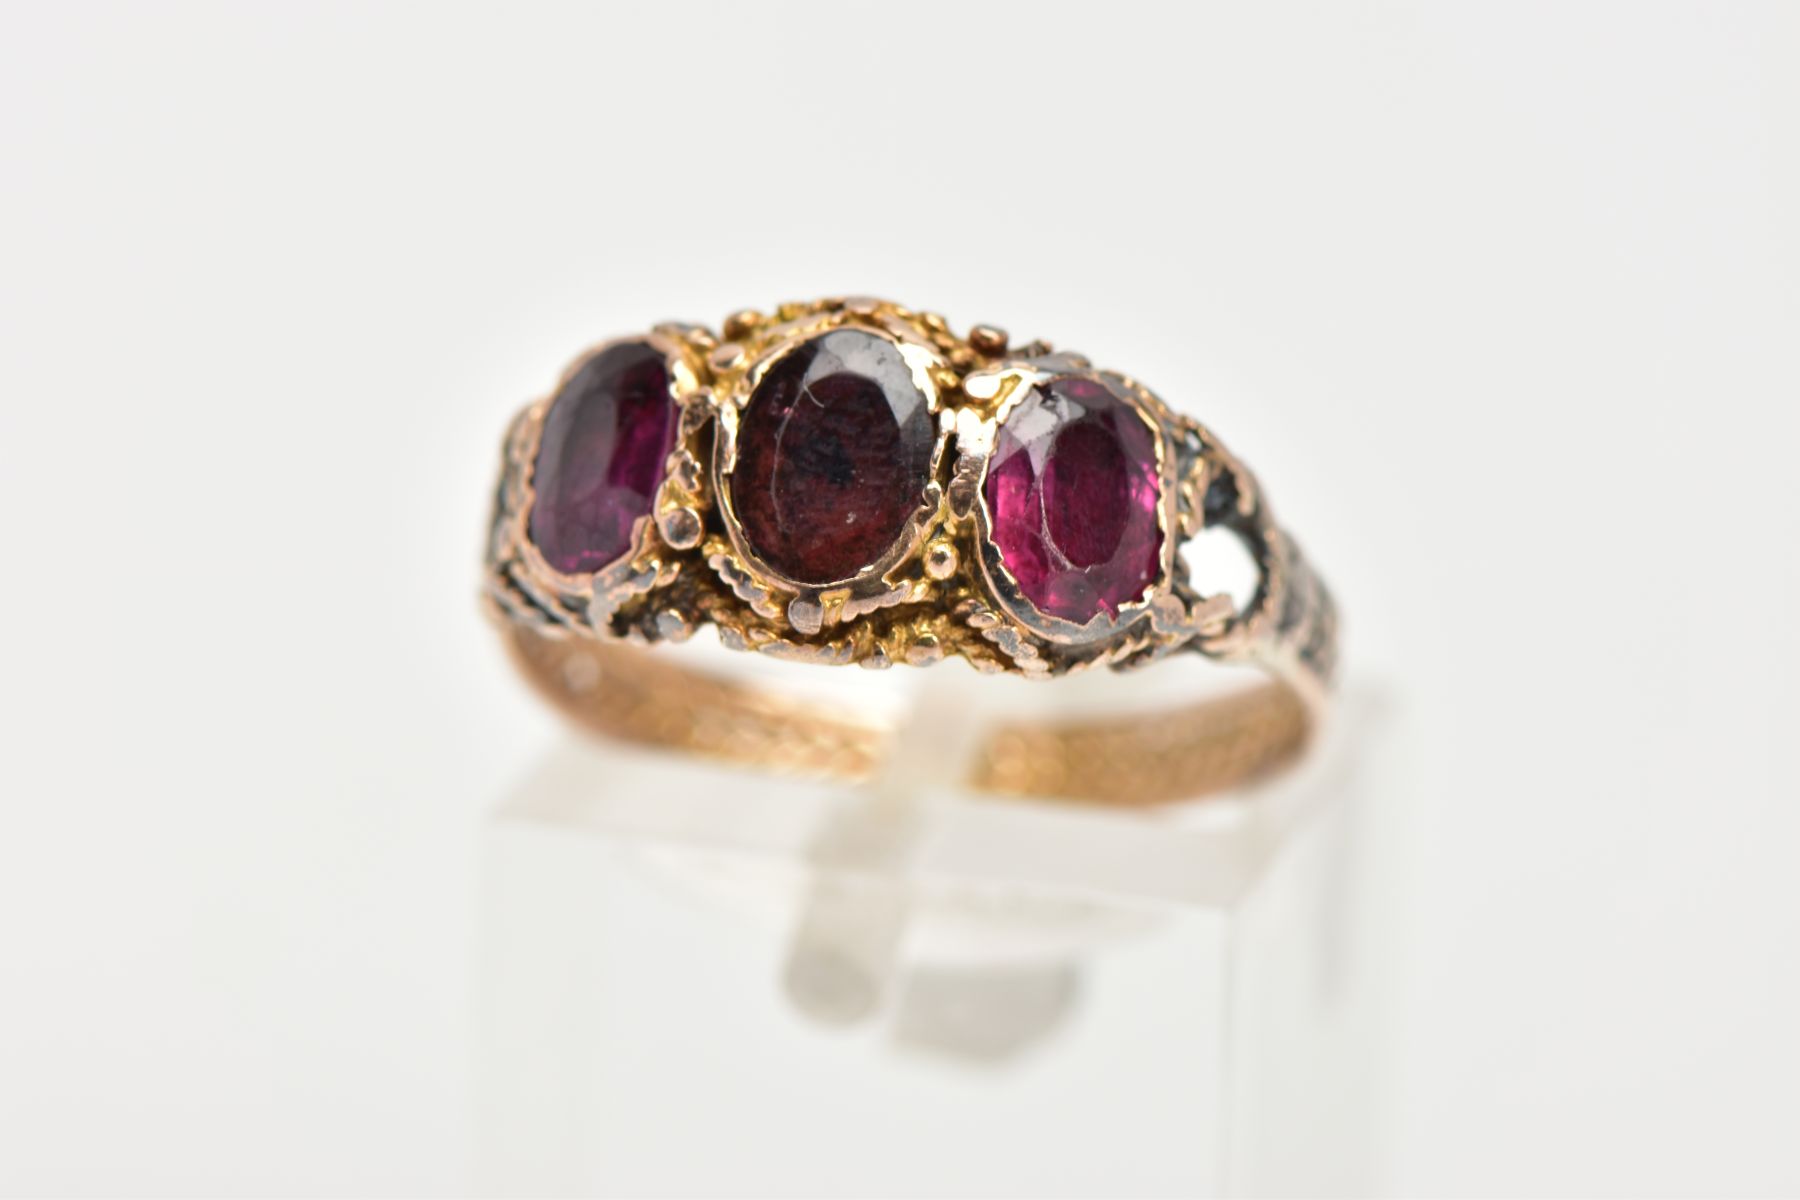 A THREE STONE GARNET RING, three oval cut garnets set within a rope twist surround leading on to the